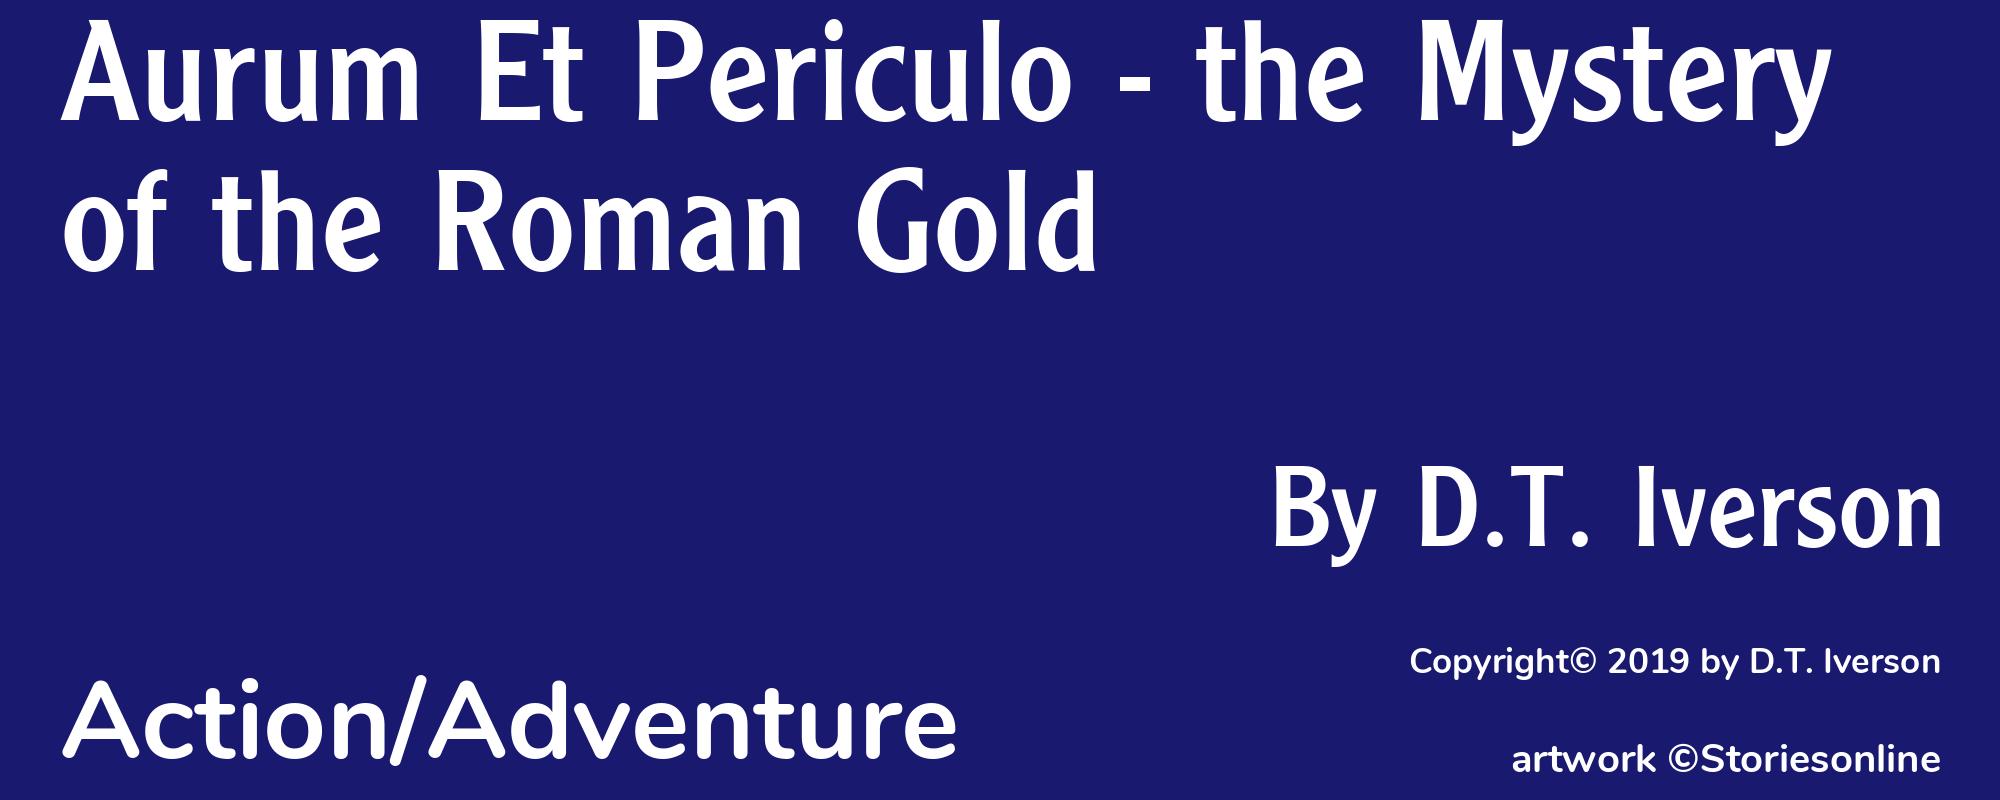 Aurum Et Periculo - the Mystery of the Roman Gold - Cover